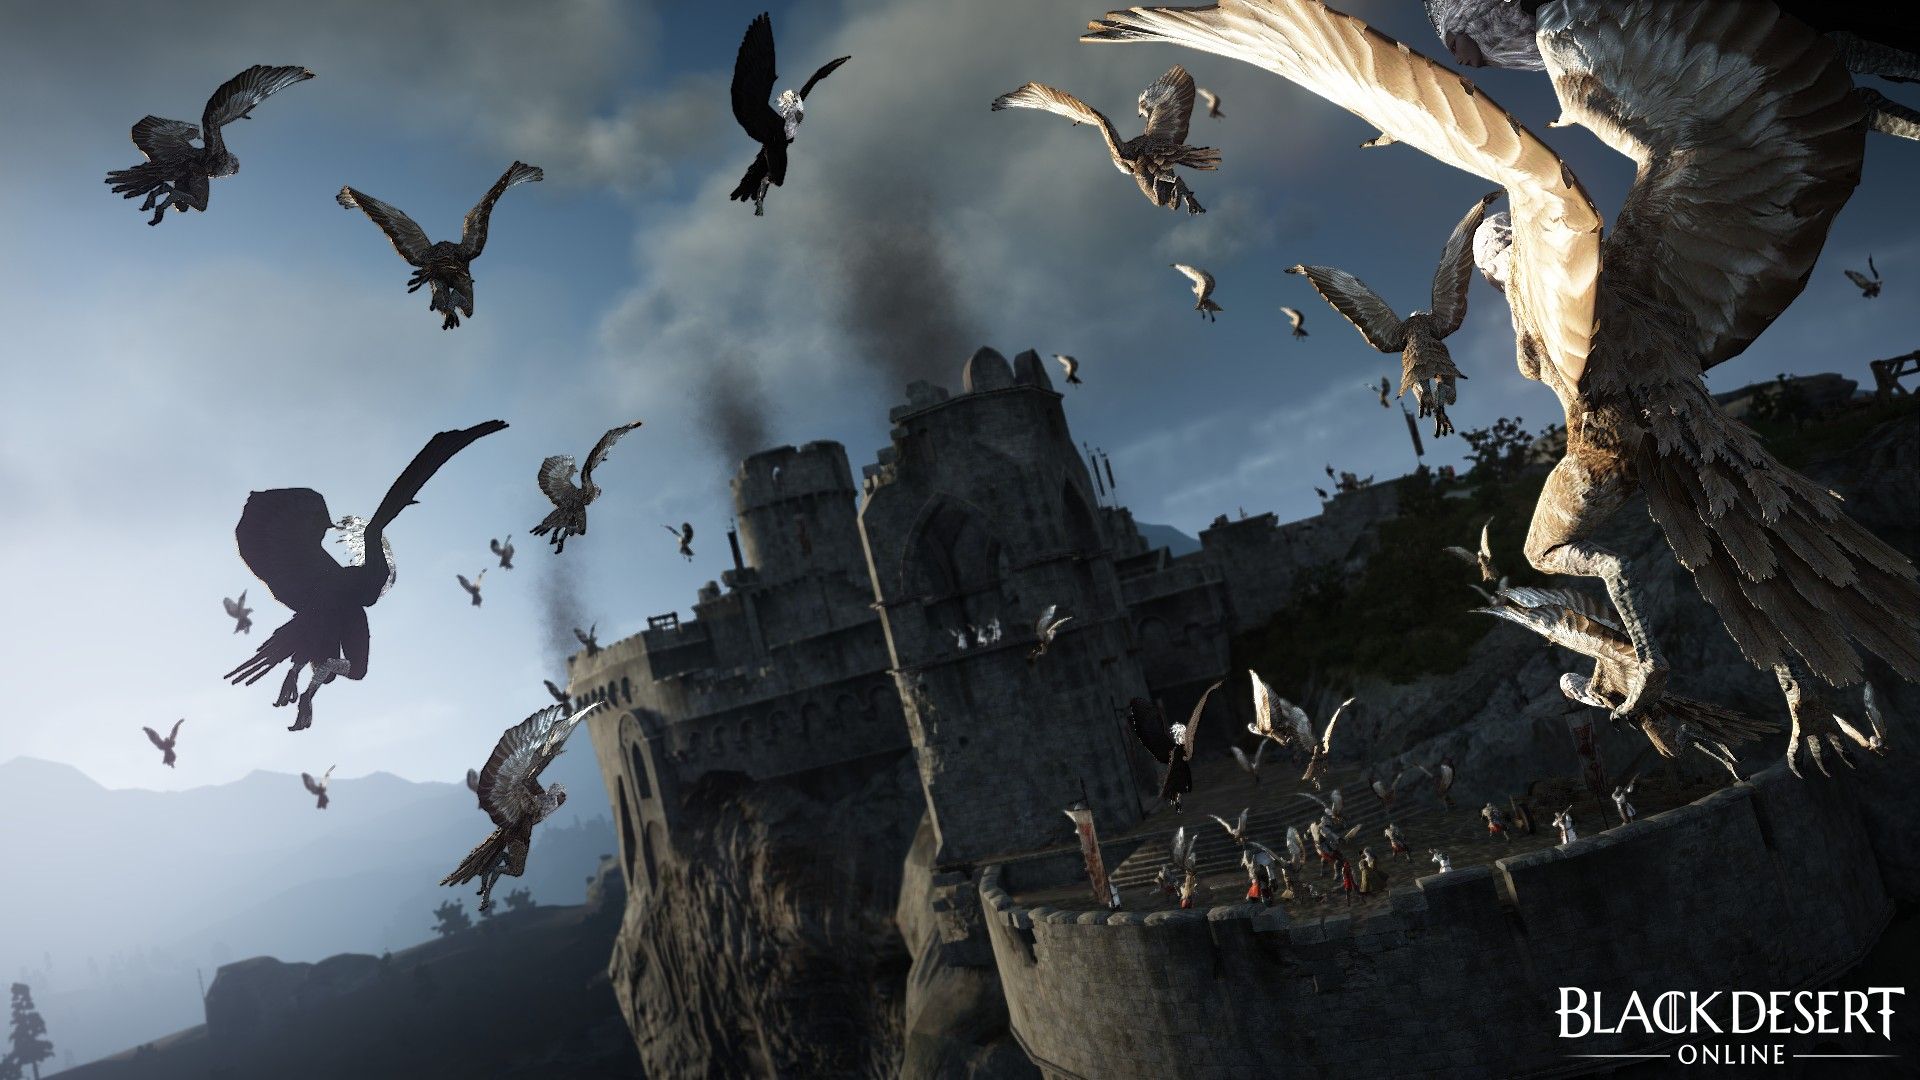 Black Desert Online Will Launch in the West Early 2016 - MMOGames.com